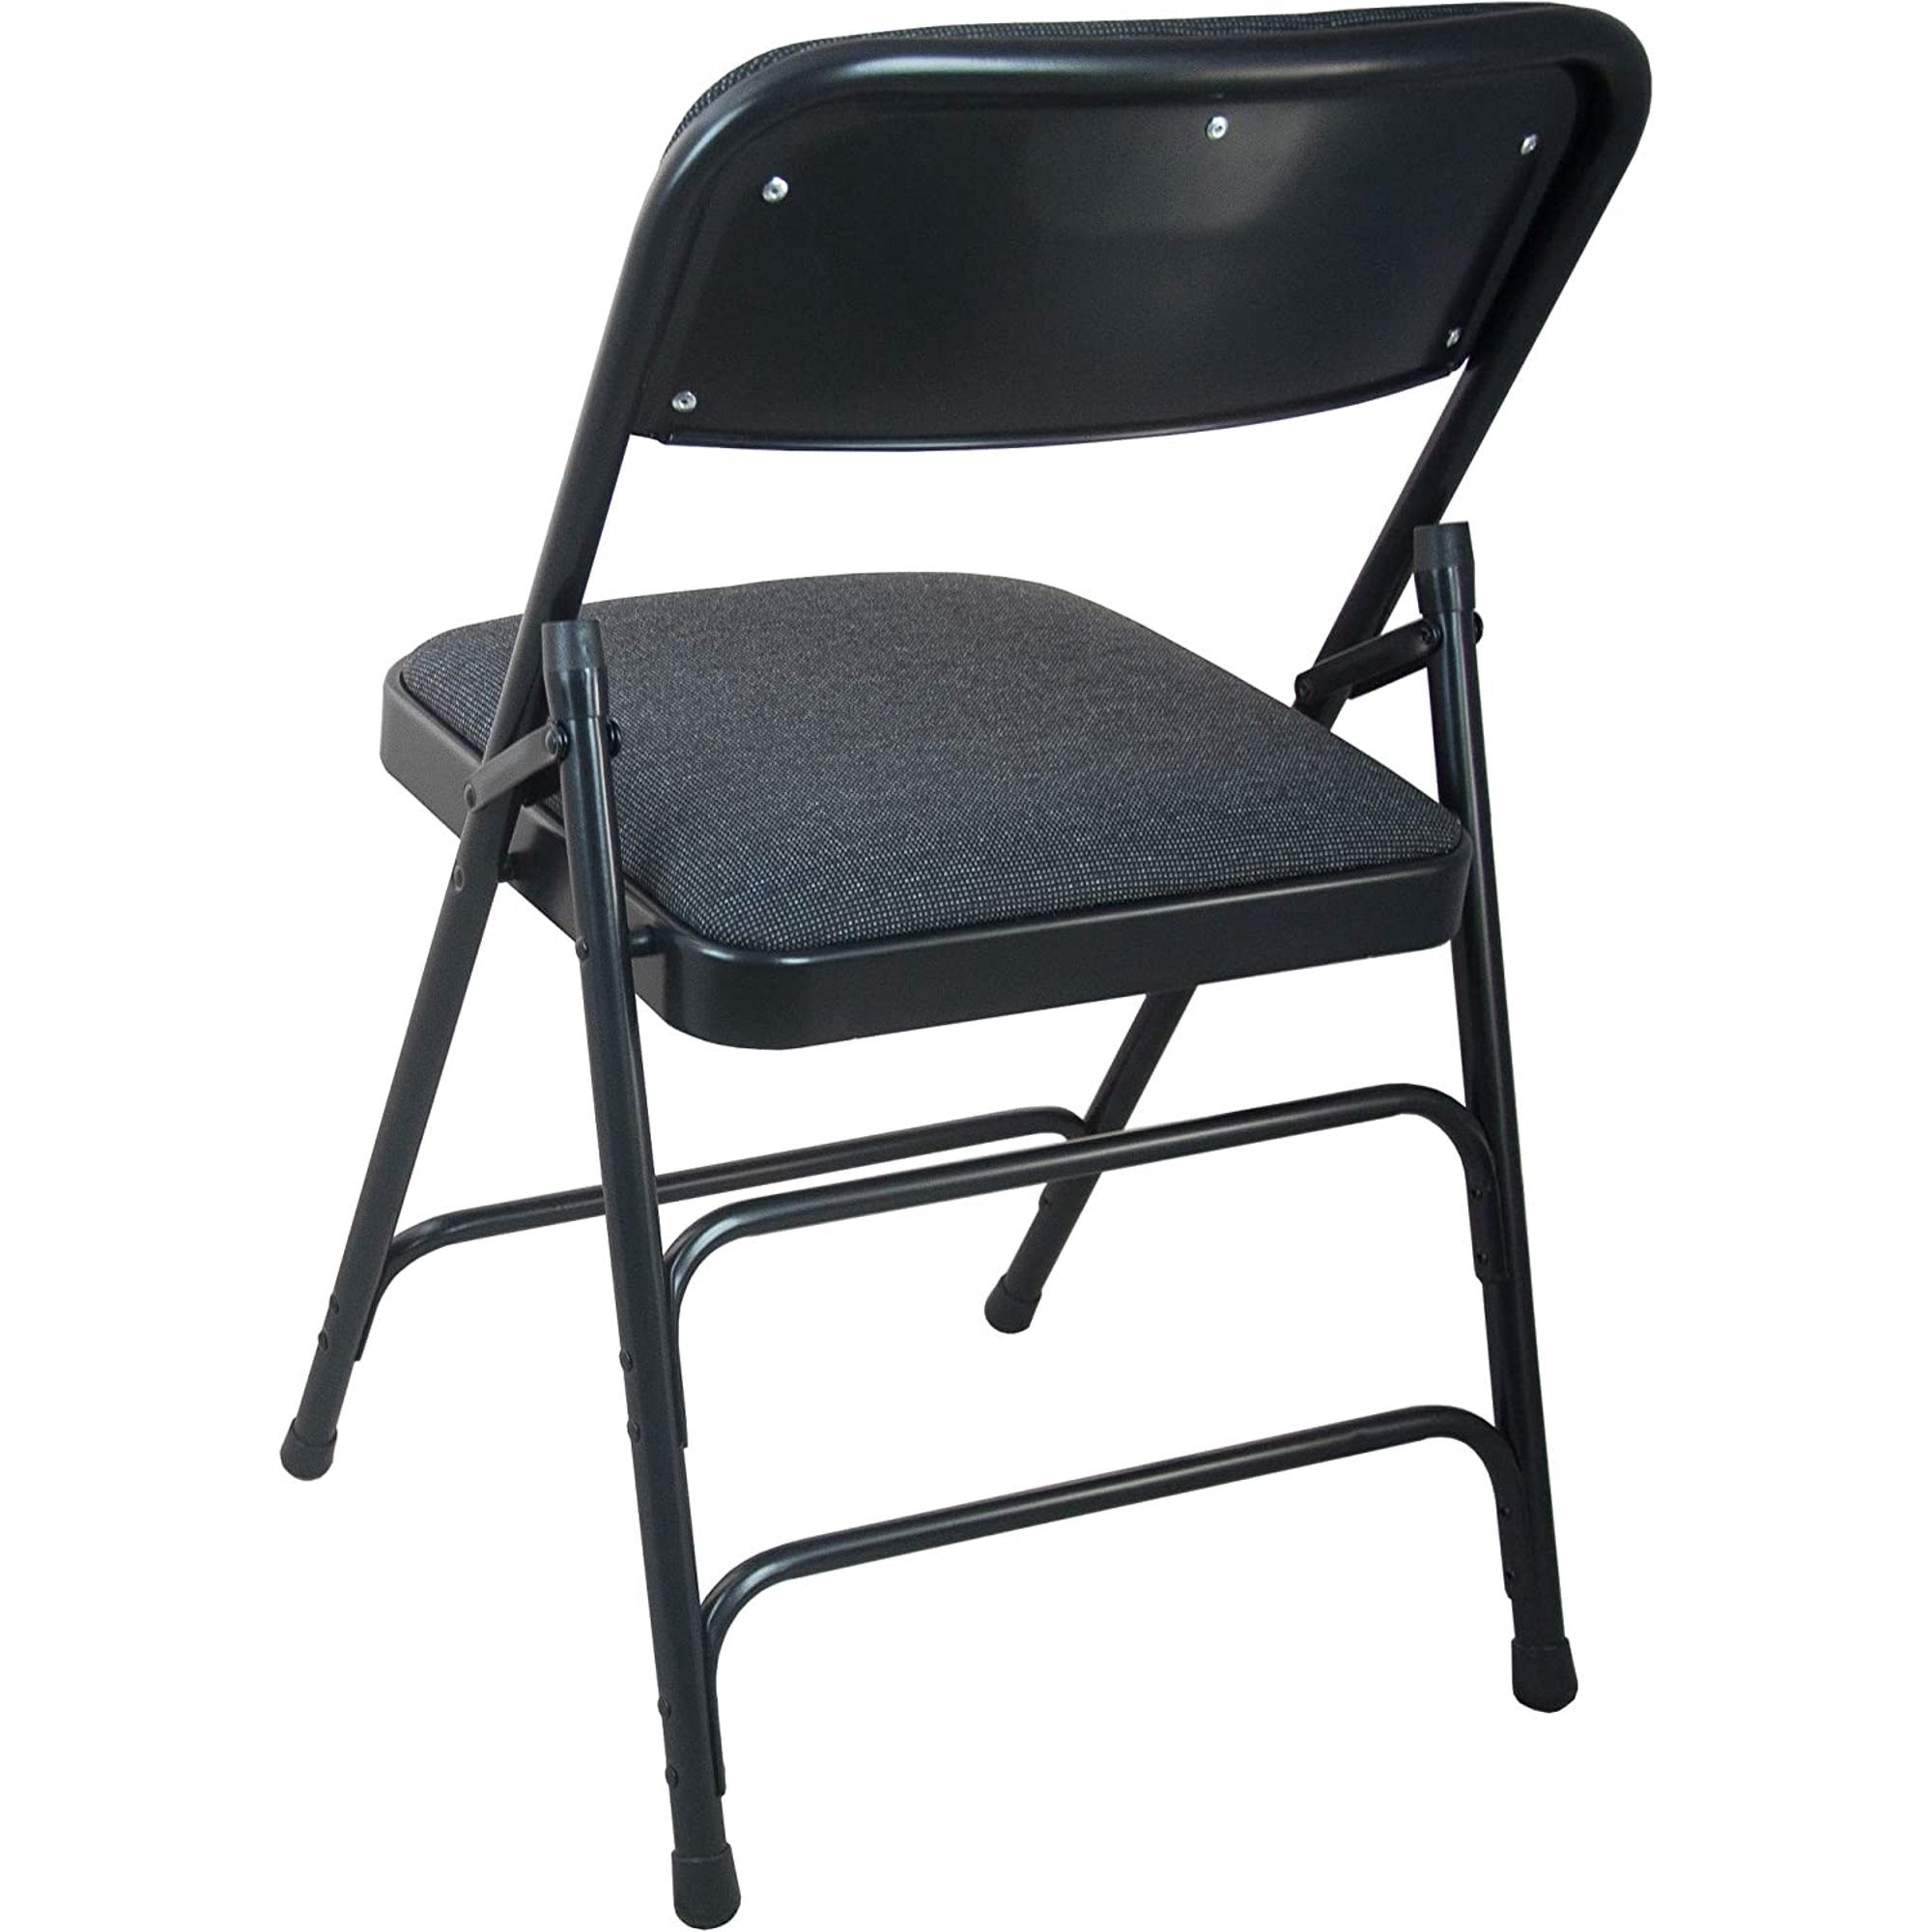 Black Padded Folding Chair with Non-Slip Feet